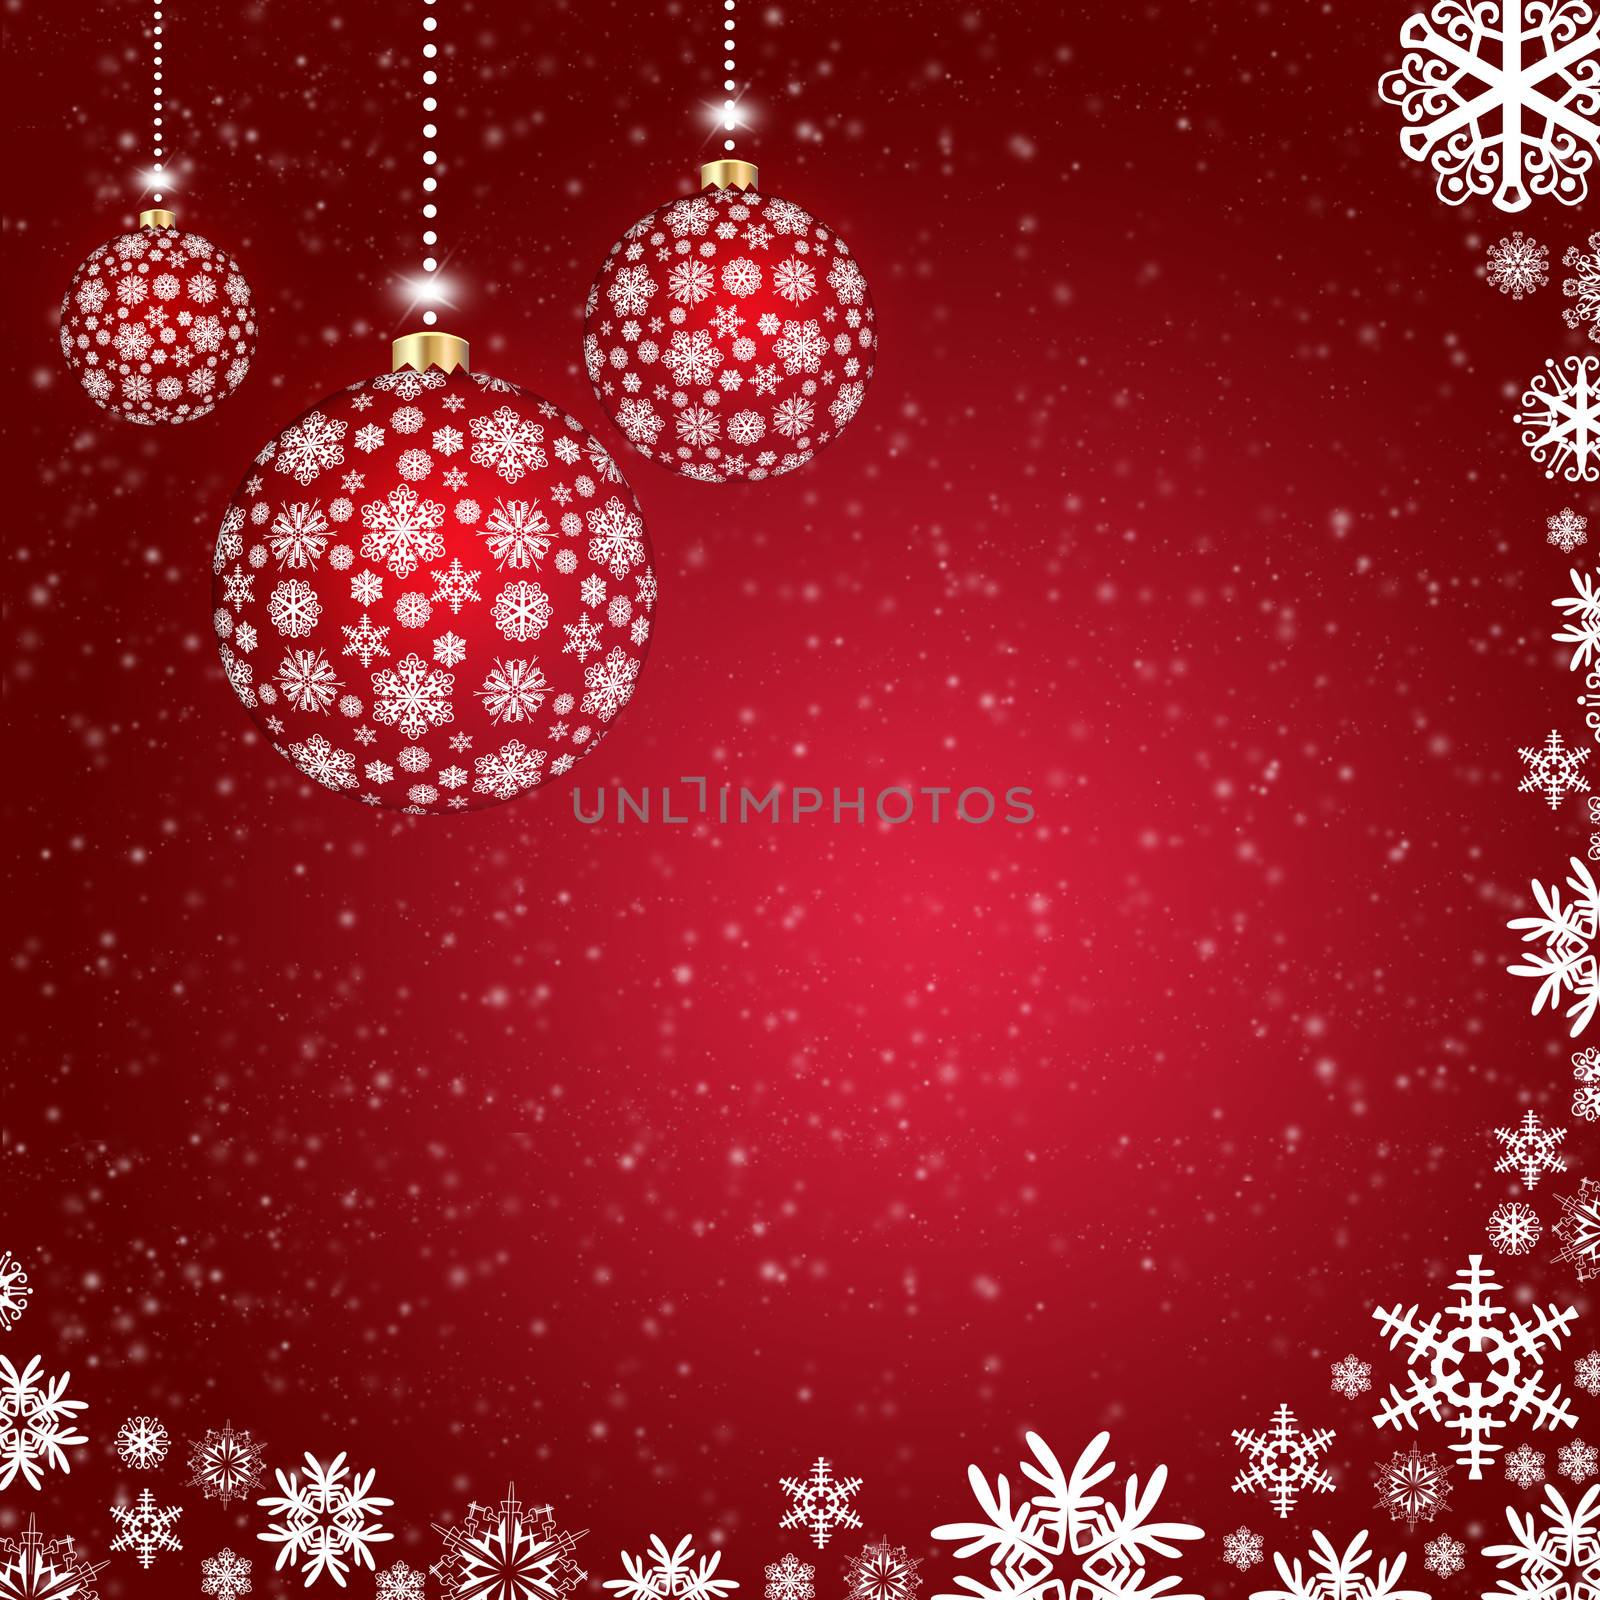 New Year's background. Christmas balls of snowflakes on a red background